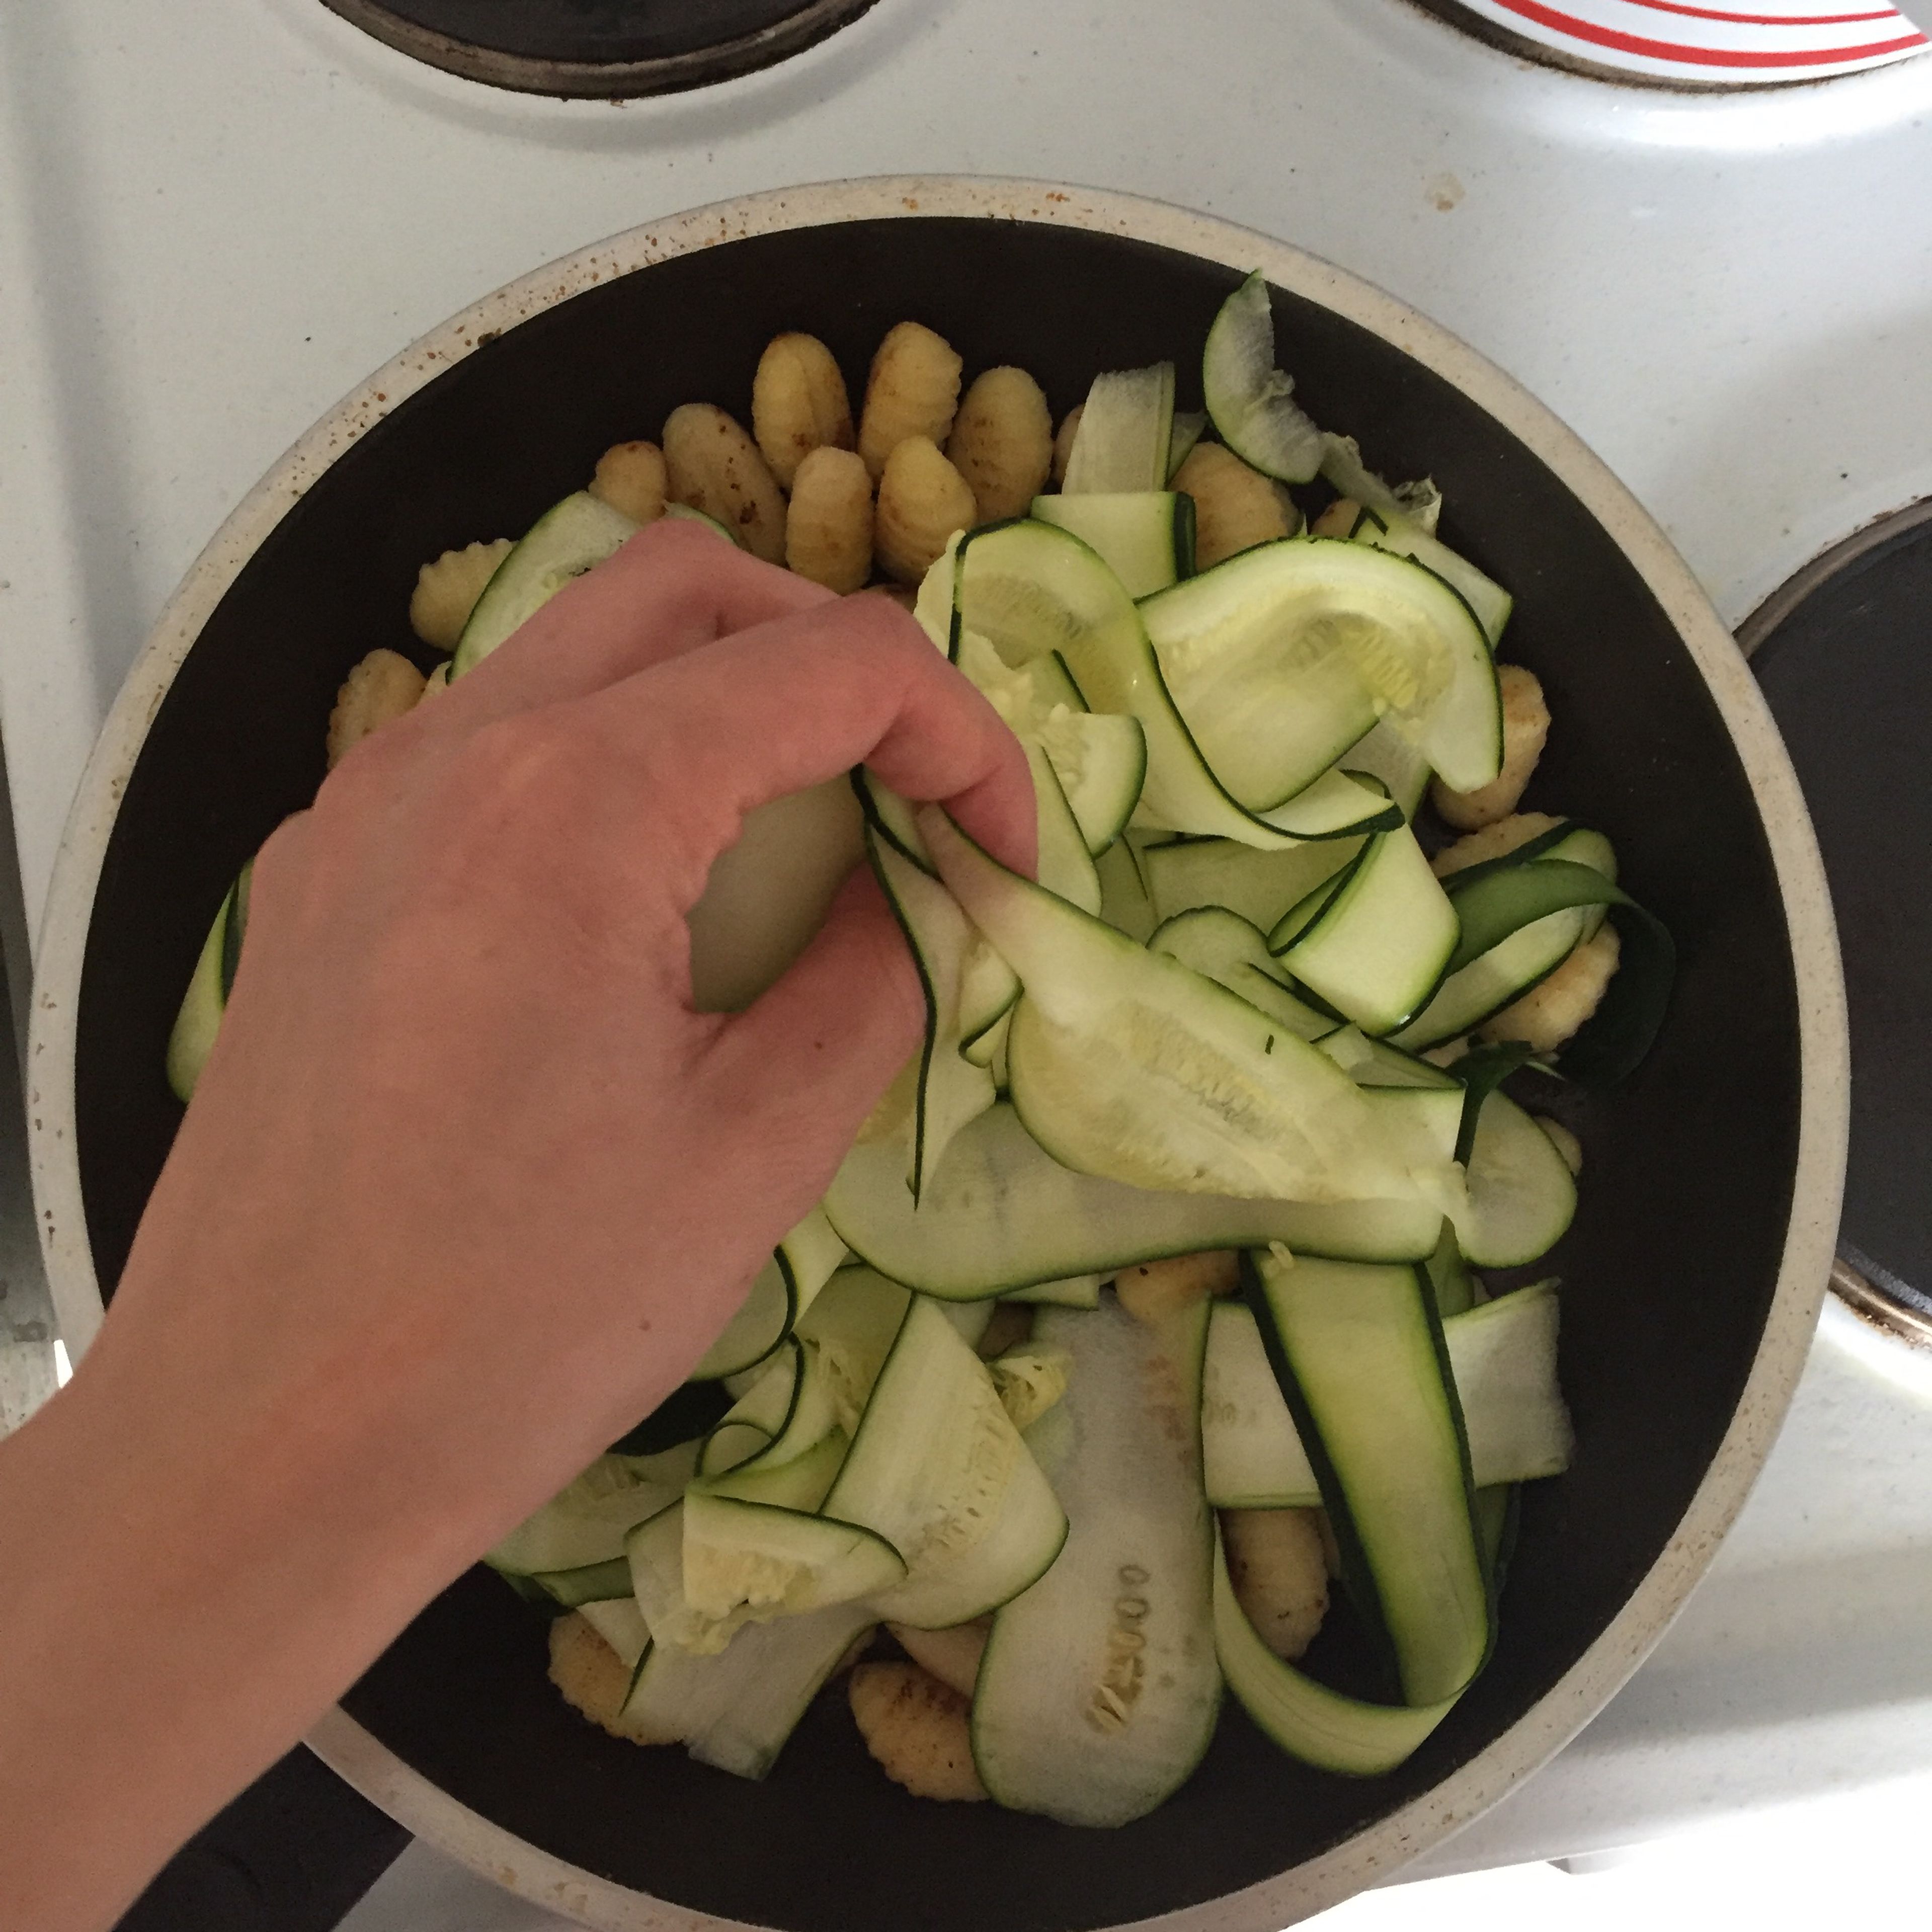 Add zucchini, stir to combine and fry shortly.